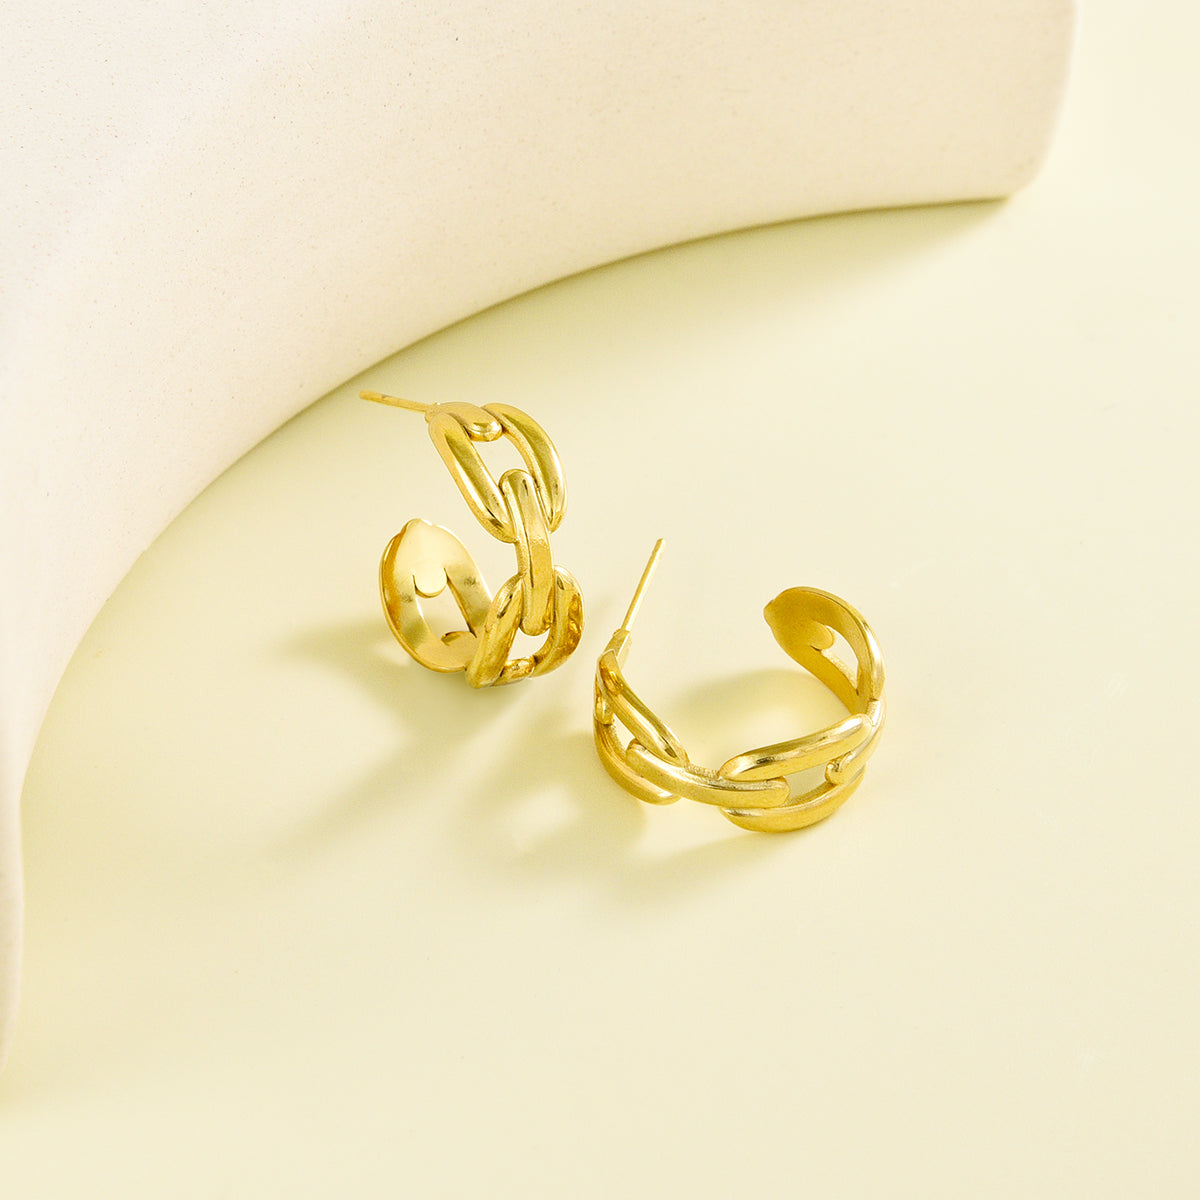 Small sized golden earrings with spacious chain design